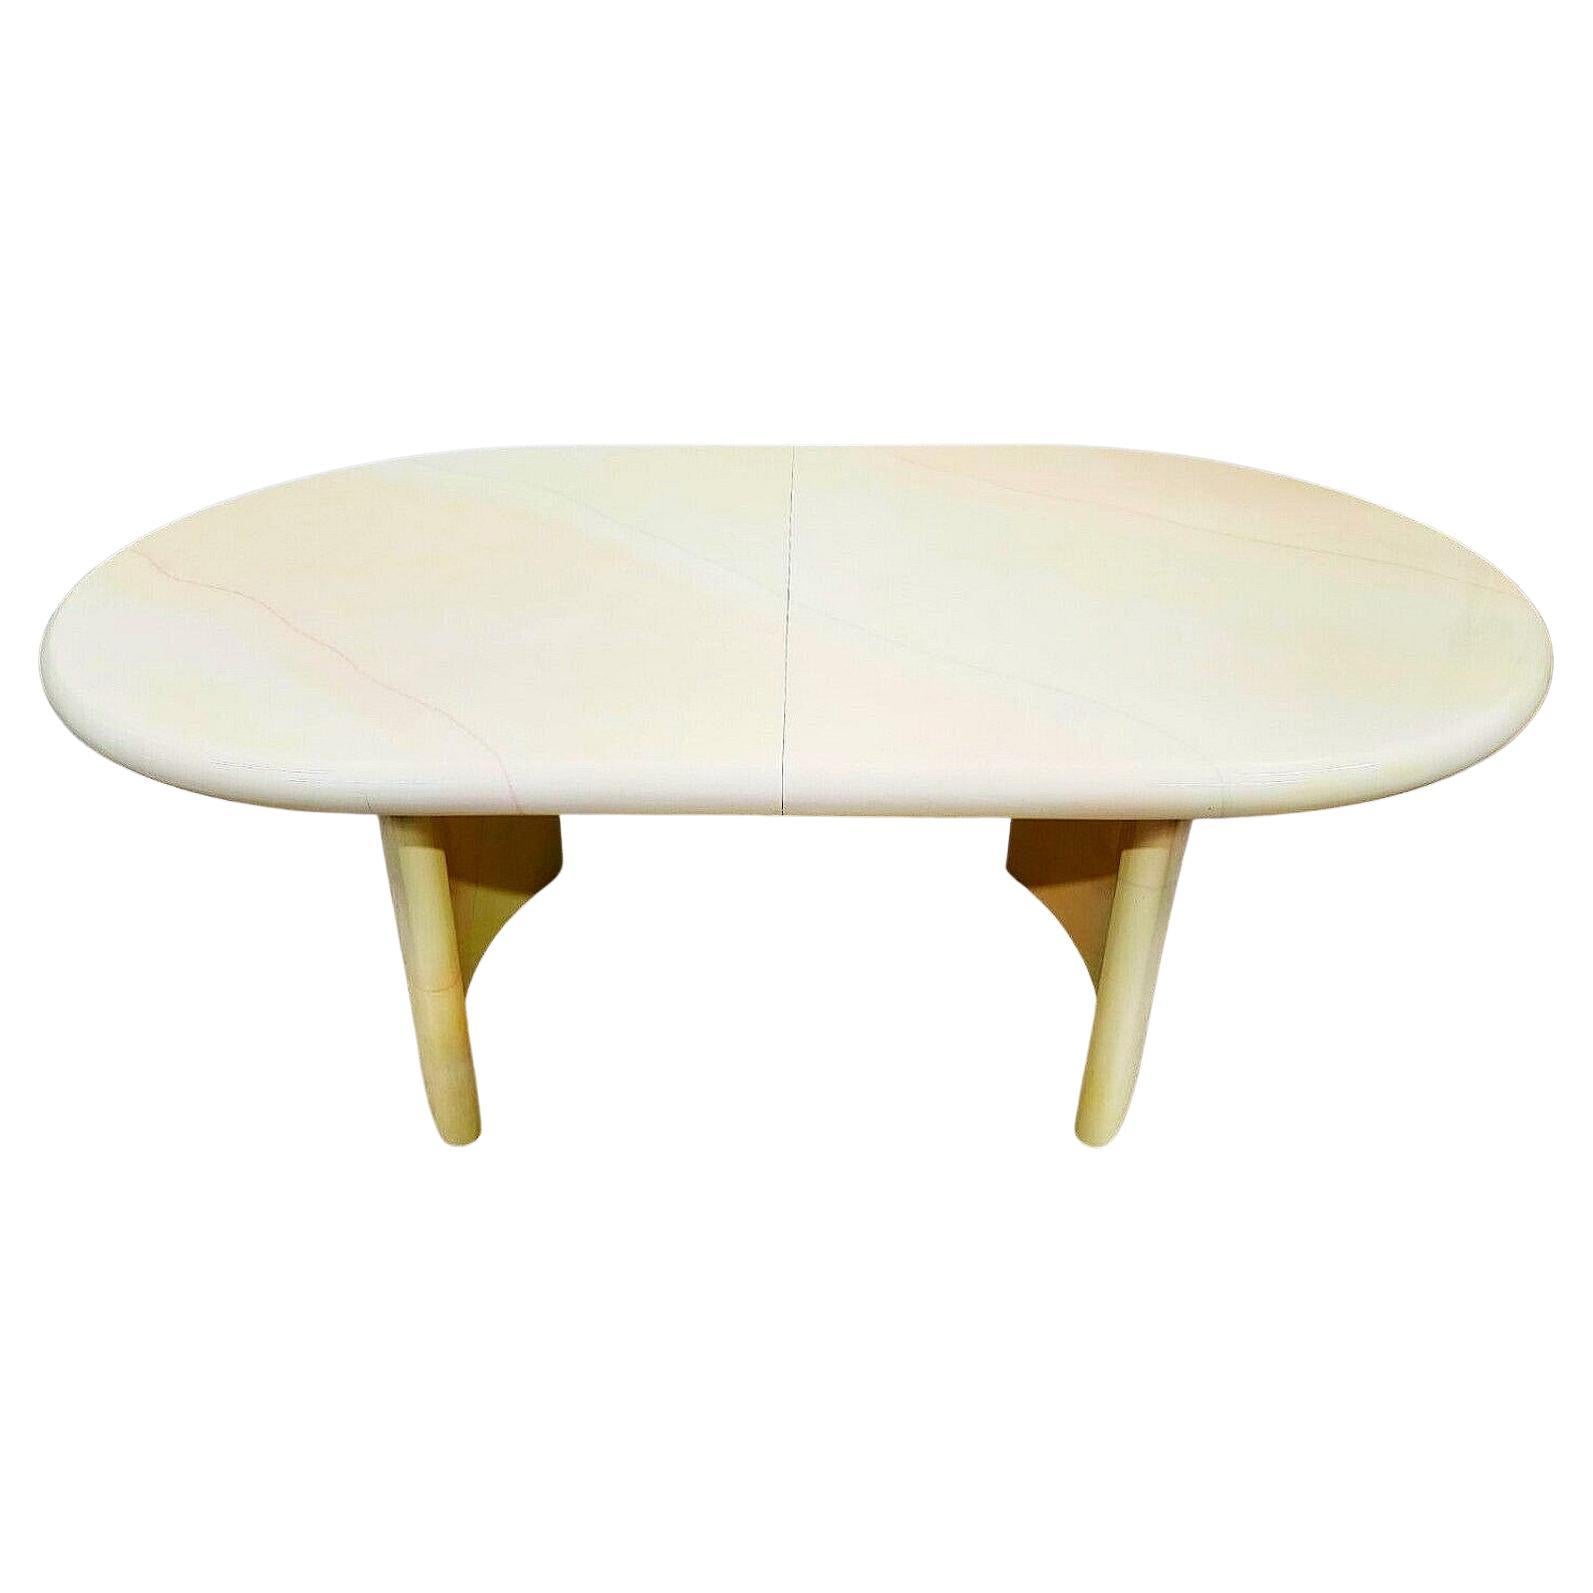 Faux Goatskin Dining Table Karl Springer Style Lacquered 1980s with Leaf For Sale